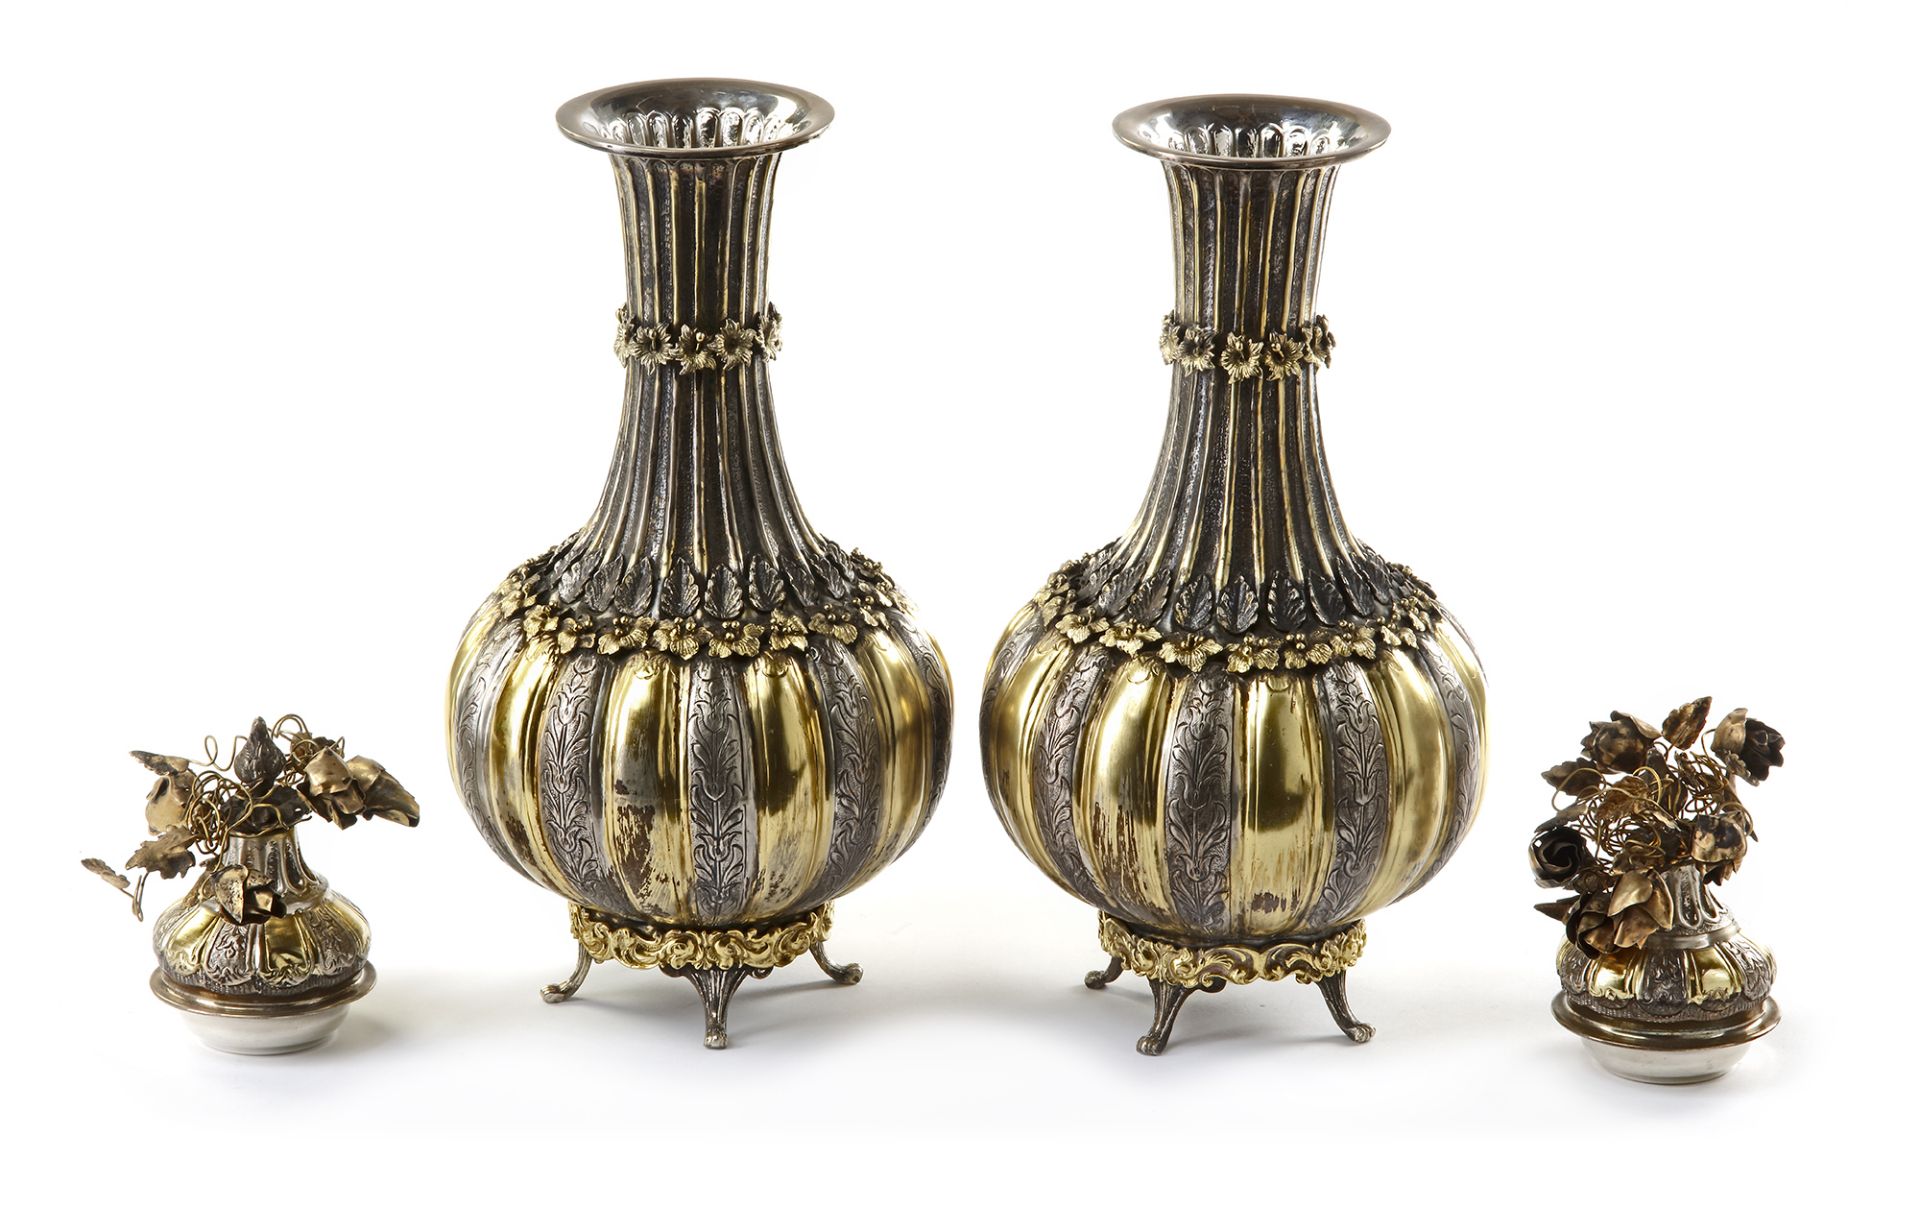 A PAIR OF GILT SILVER VASES WITH COVERS, TURKEY, 19TH CENTURY - Image 5 of 10